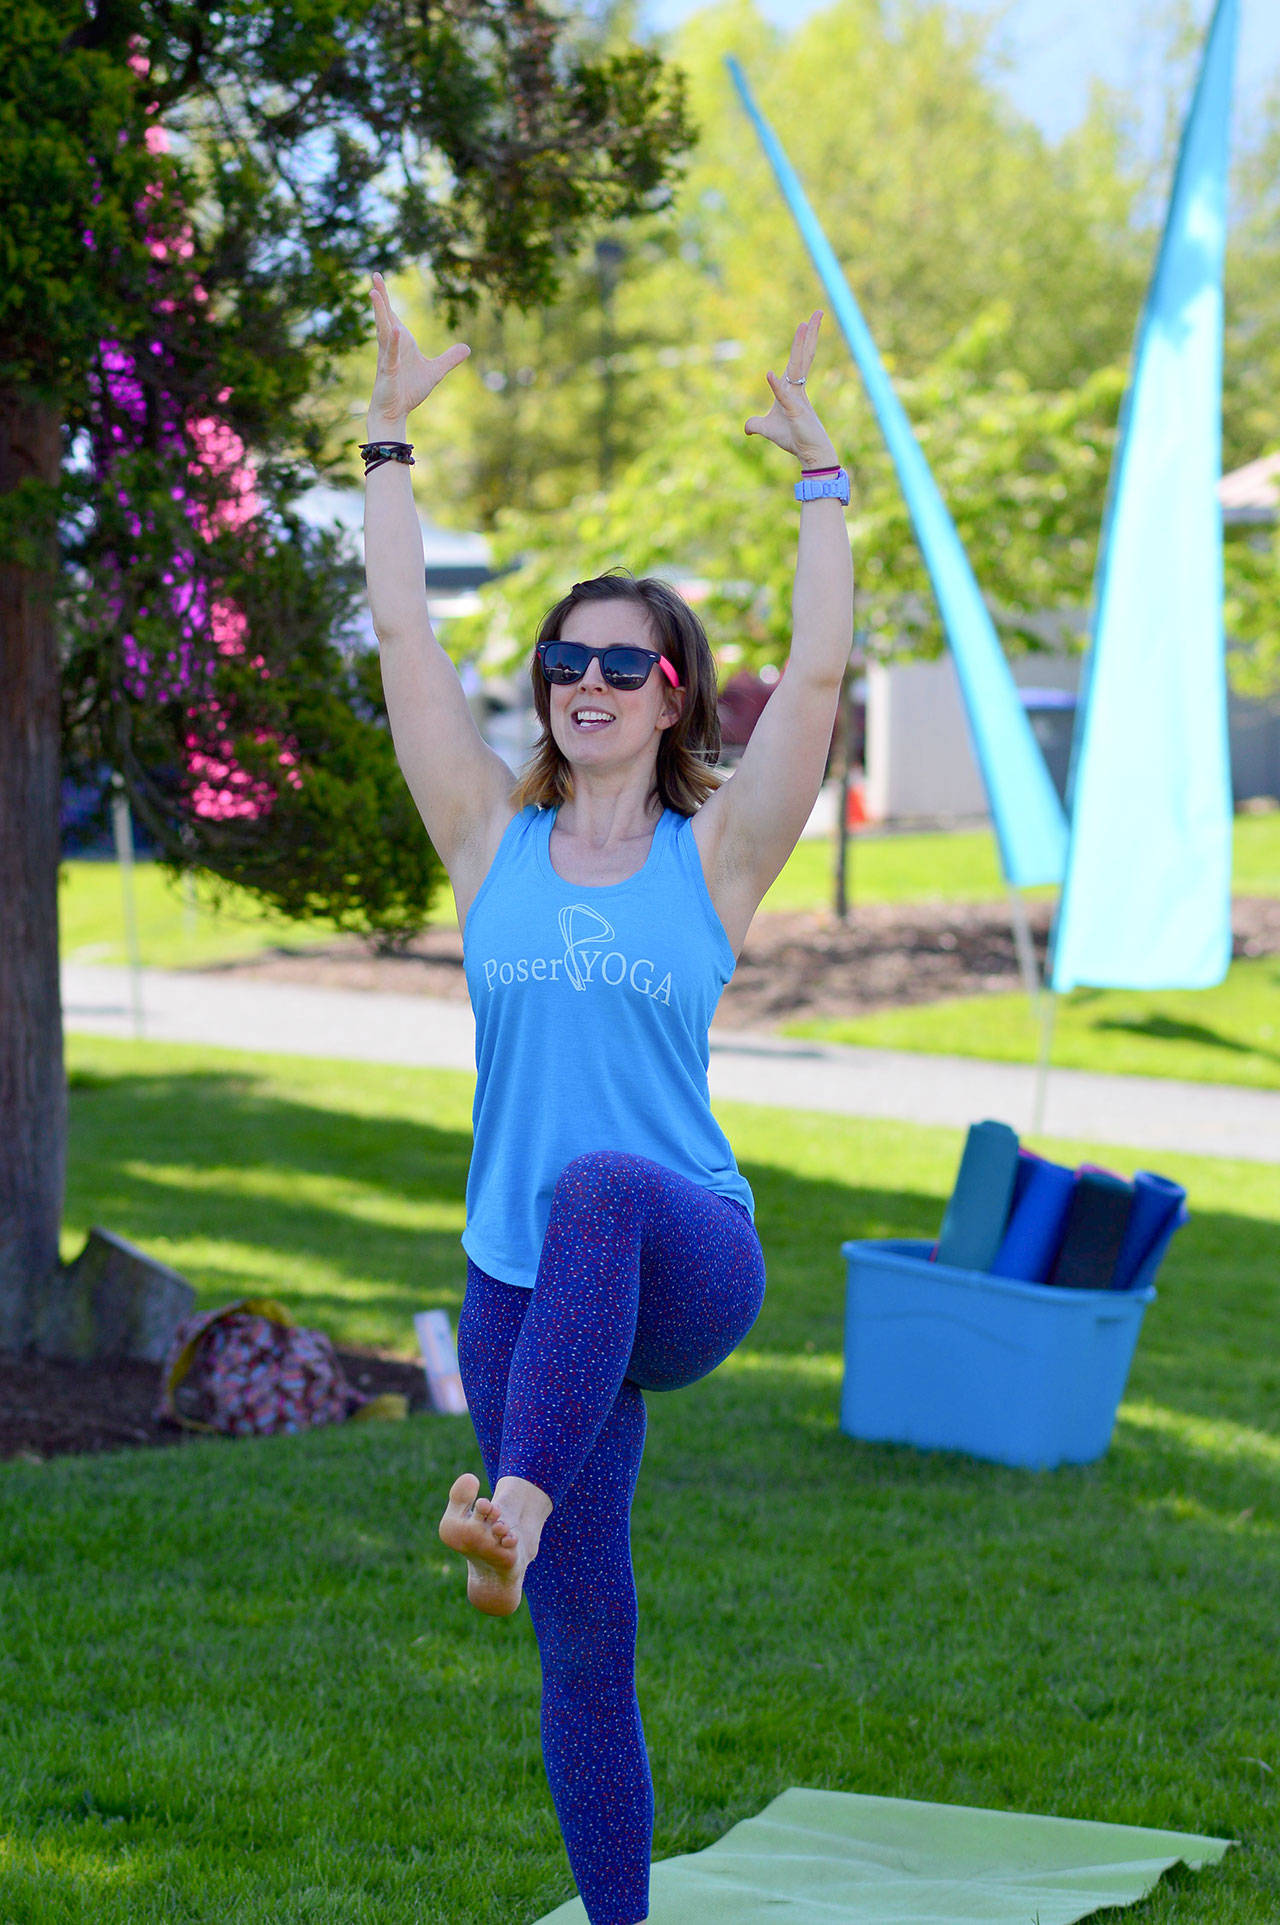 Jenny Stewart Houston of Poser Yoga will offer two free yoga classes this spring at the Port Angeles Fine Arts Center. Photo by Diane Urbani de la Paz